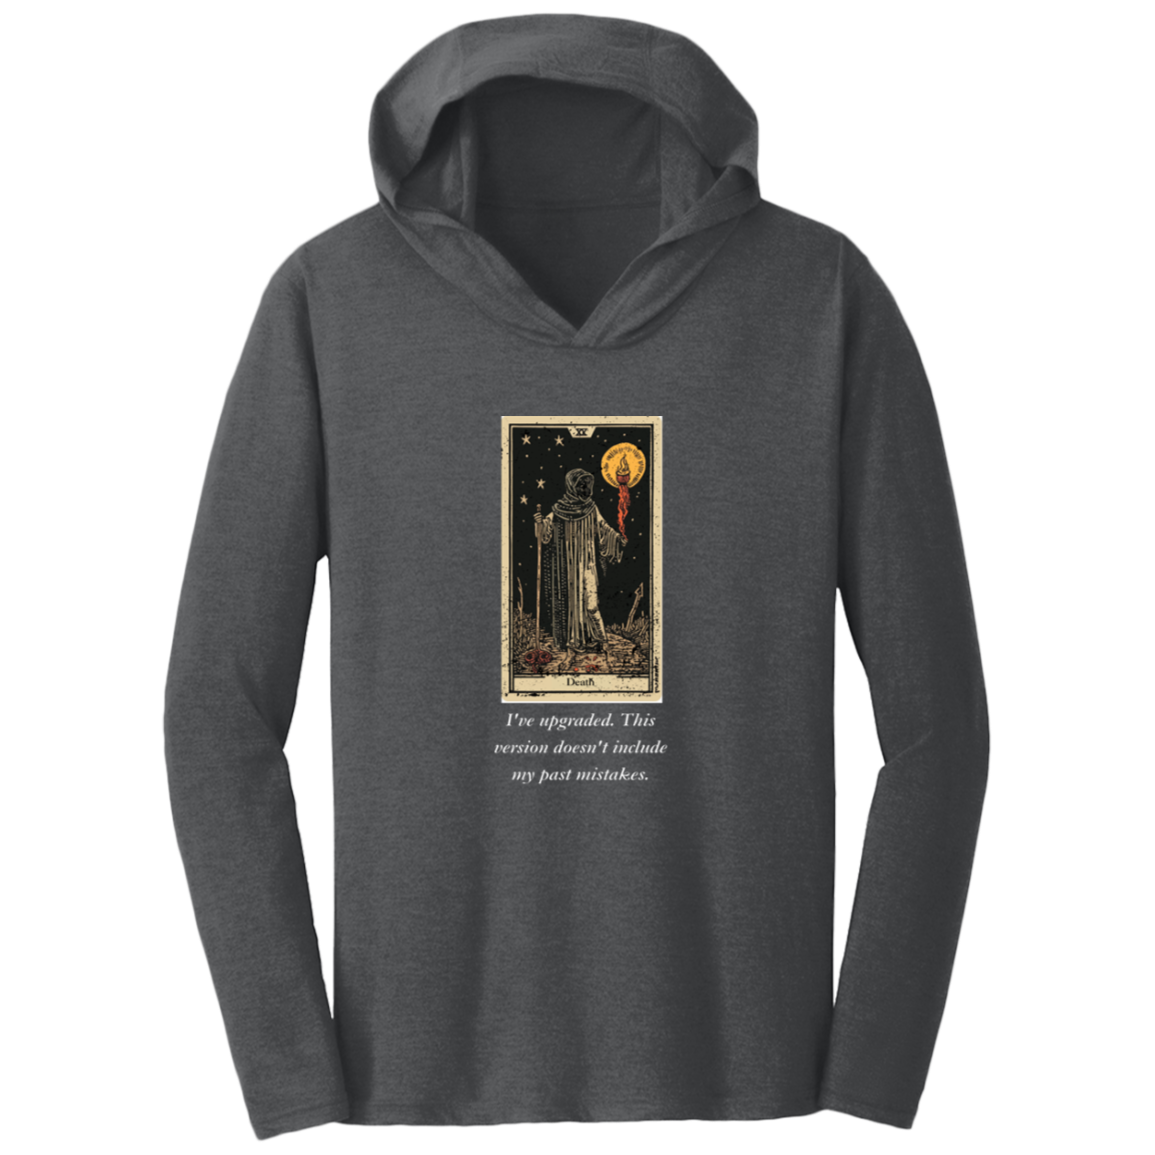 Funny, death tarot card, Charcoal Gray men's hoodie from BLK Moon Shop